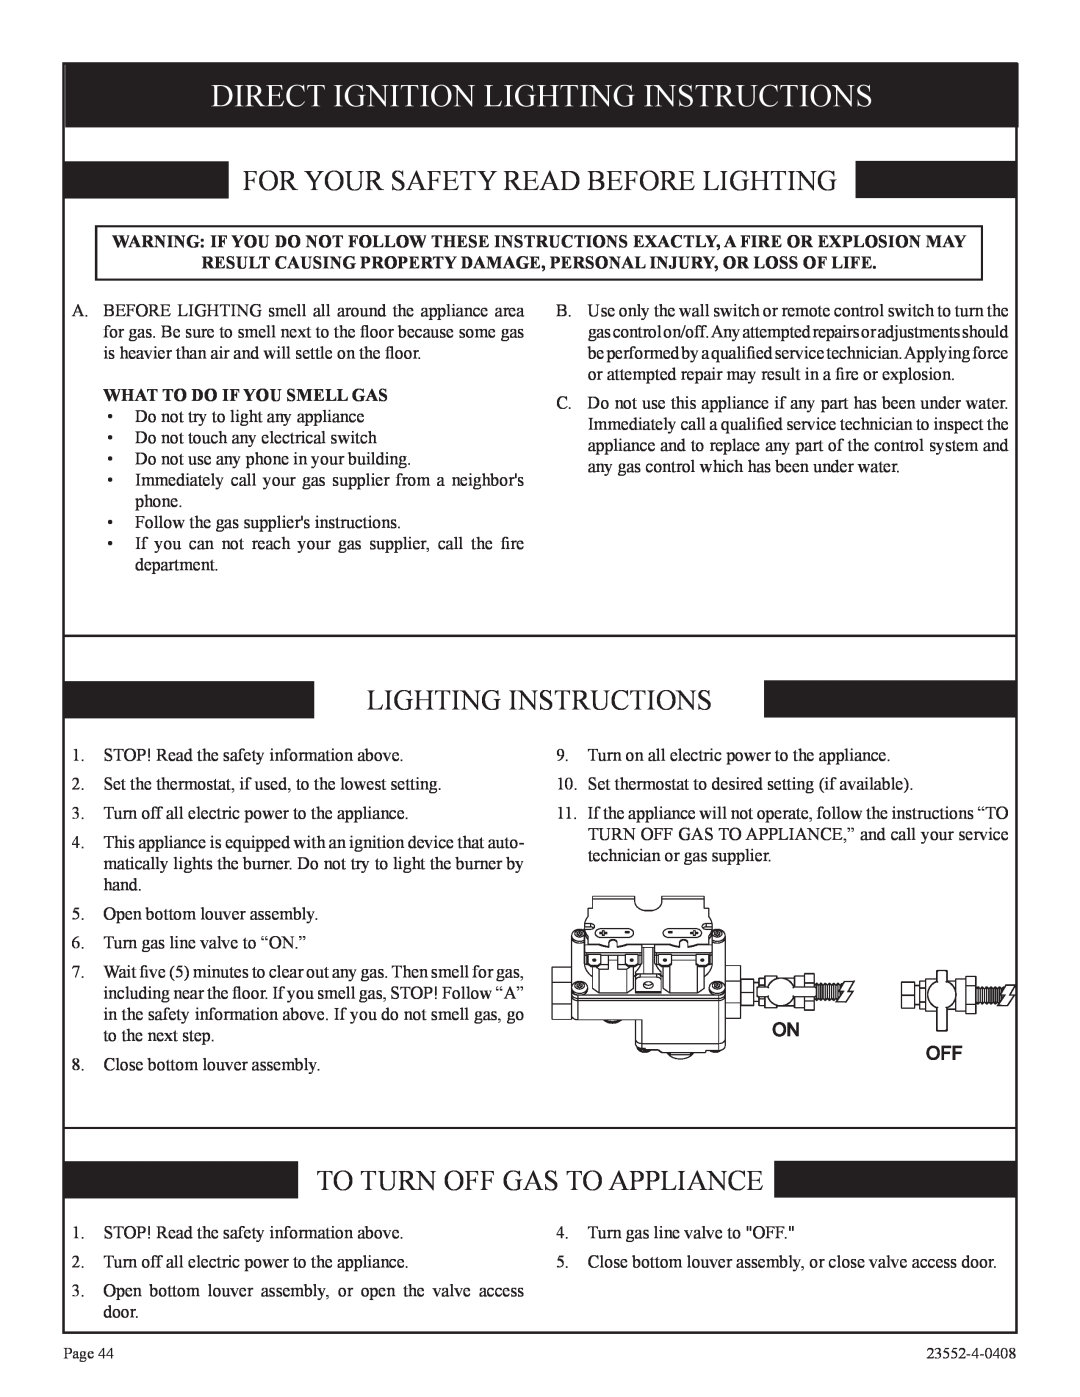 Empire Comfort Systems 1, DVD32FP3, 3)(N Direct Ignition Lighting Instructions, To Turn Off Gas To Appliance, On Off 